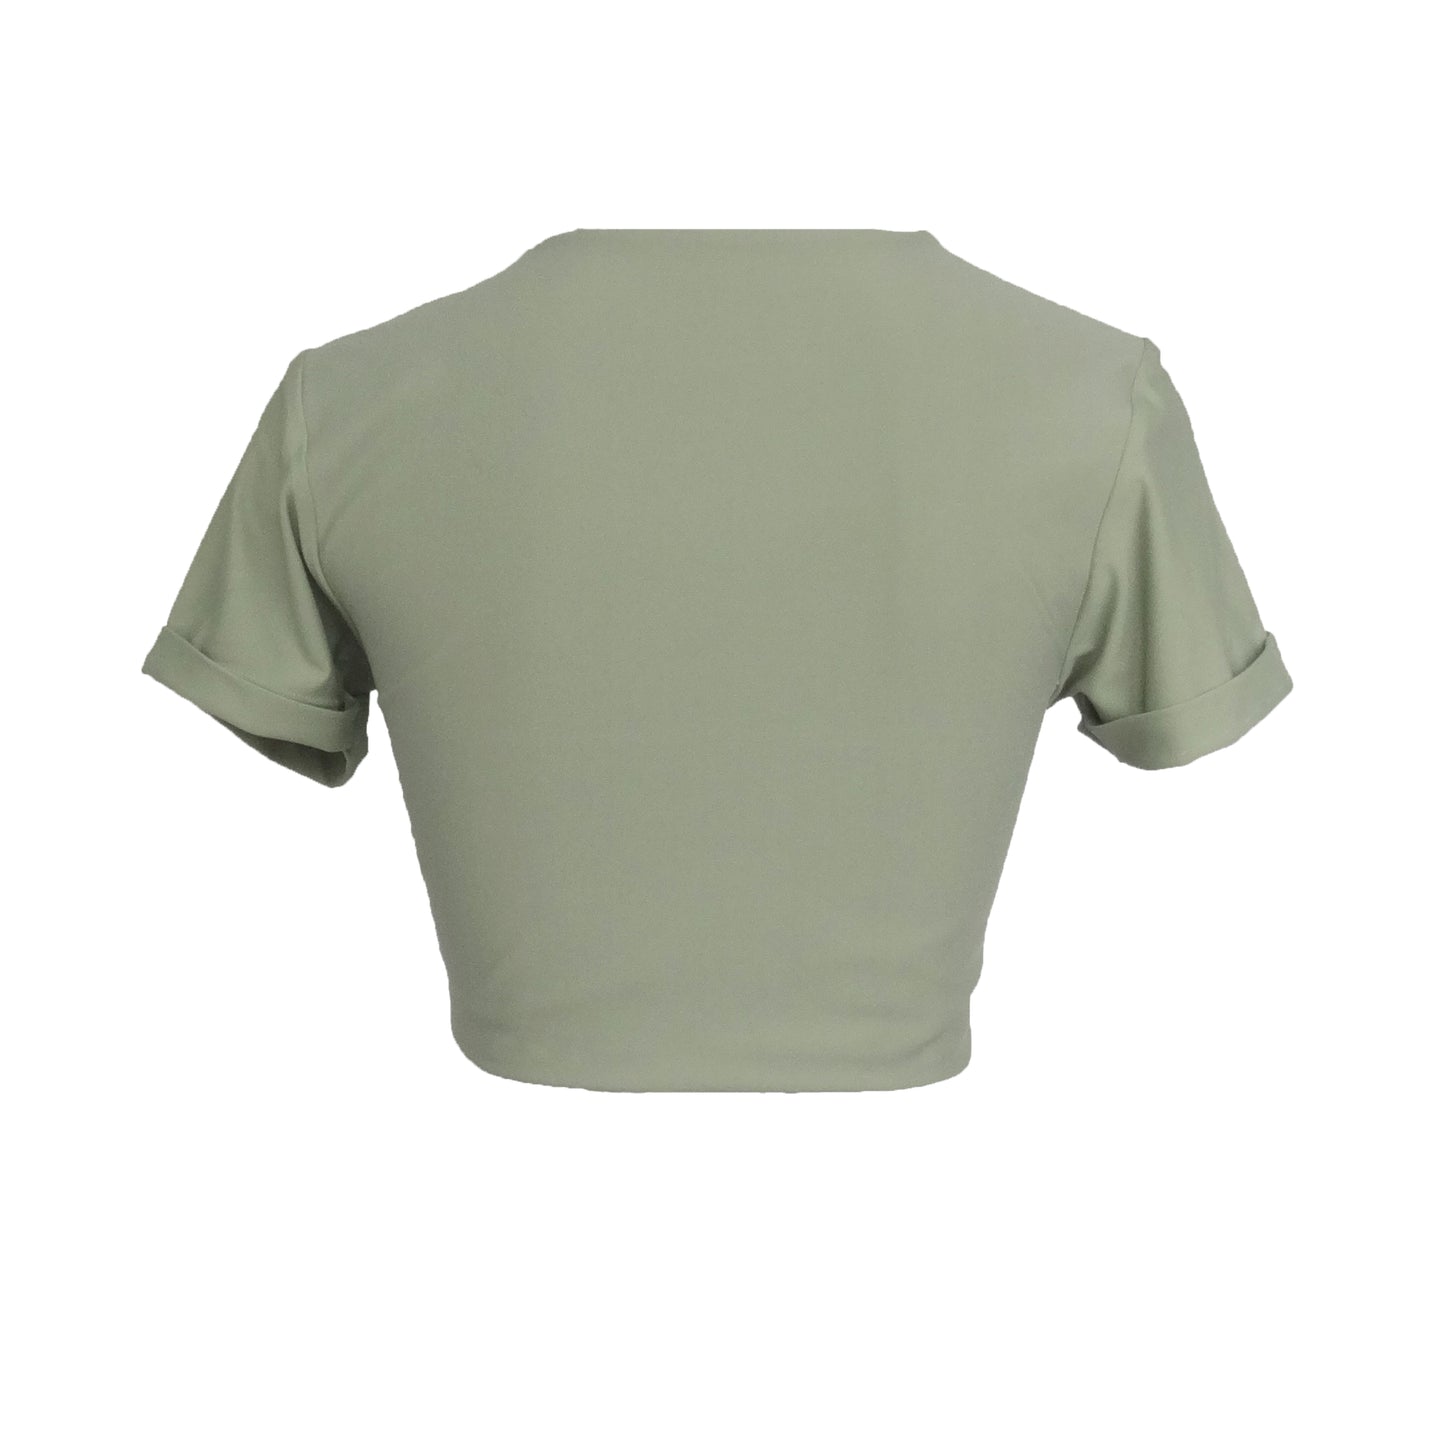 Back view of sage green short sleeve bikini top with adjustable tie front and rolled cuff short sleeves. This bikini top has a plunging neckline illusion and gives versatility to double as a crop top.